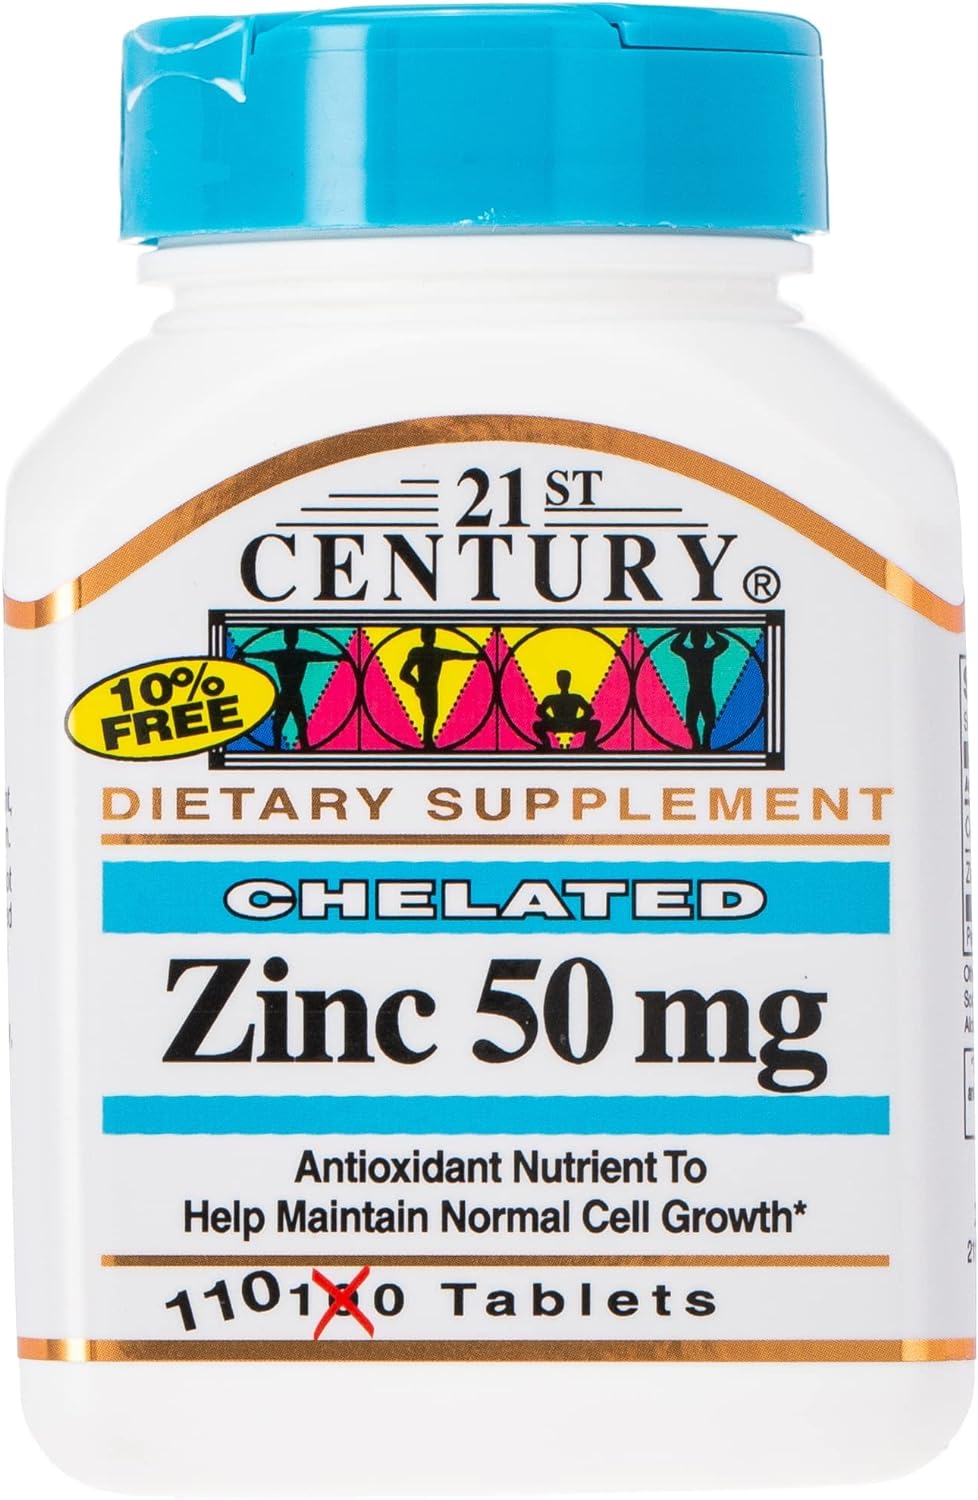 21st Century Chelated Zinc 50 mg, 110 Tablets